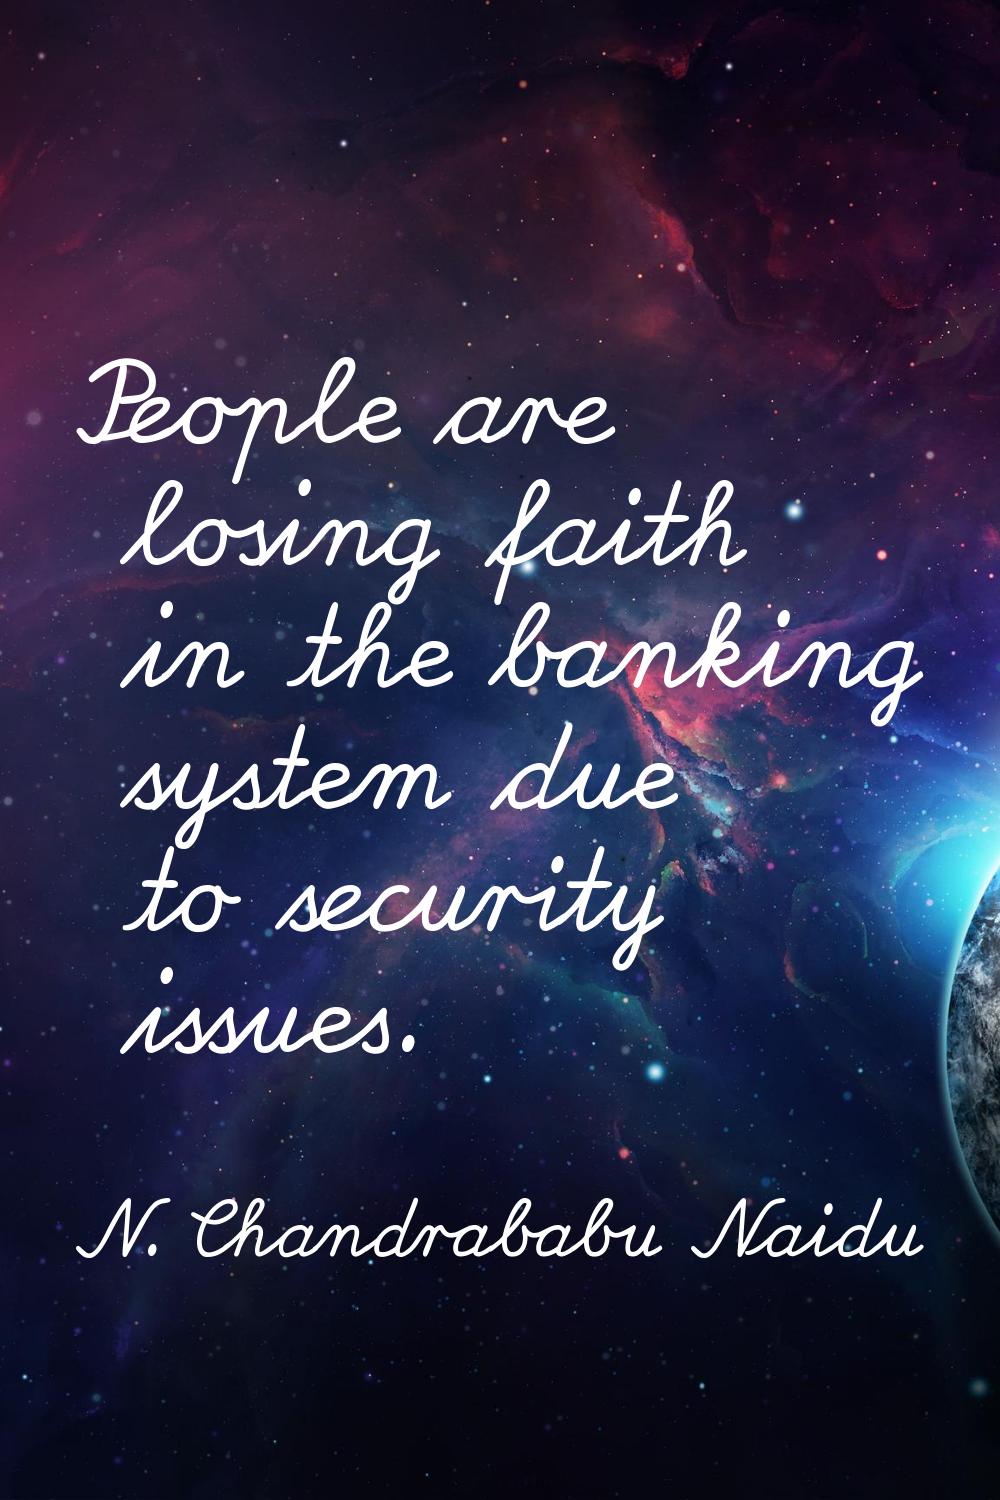 People are losing faith in the banking system due to security issues.